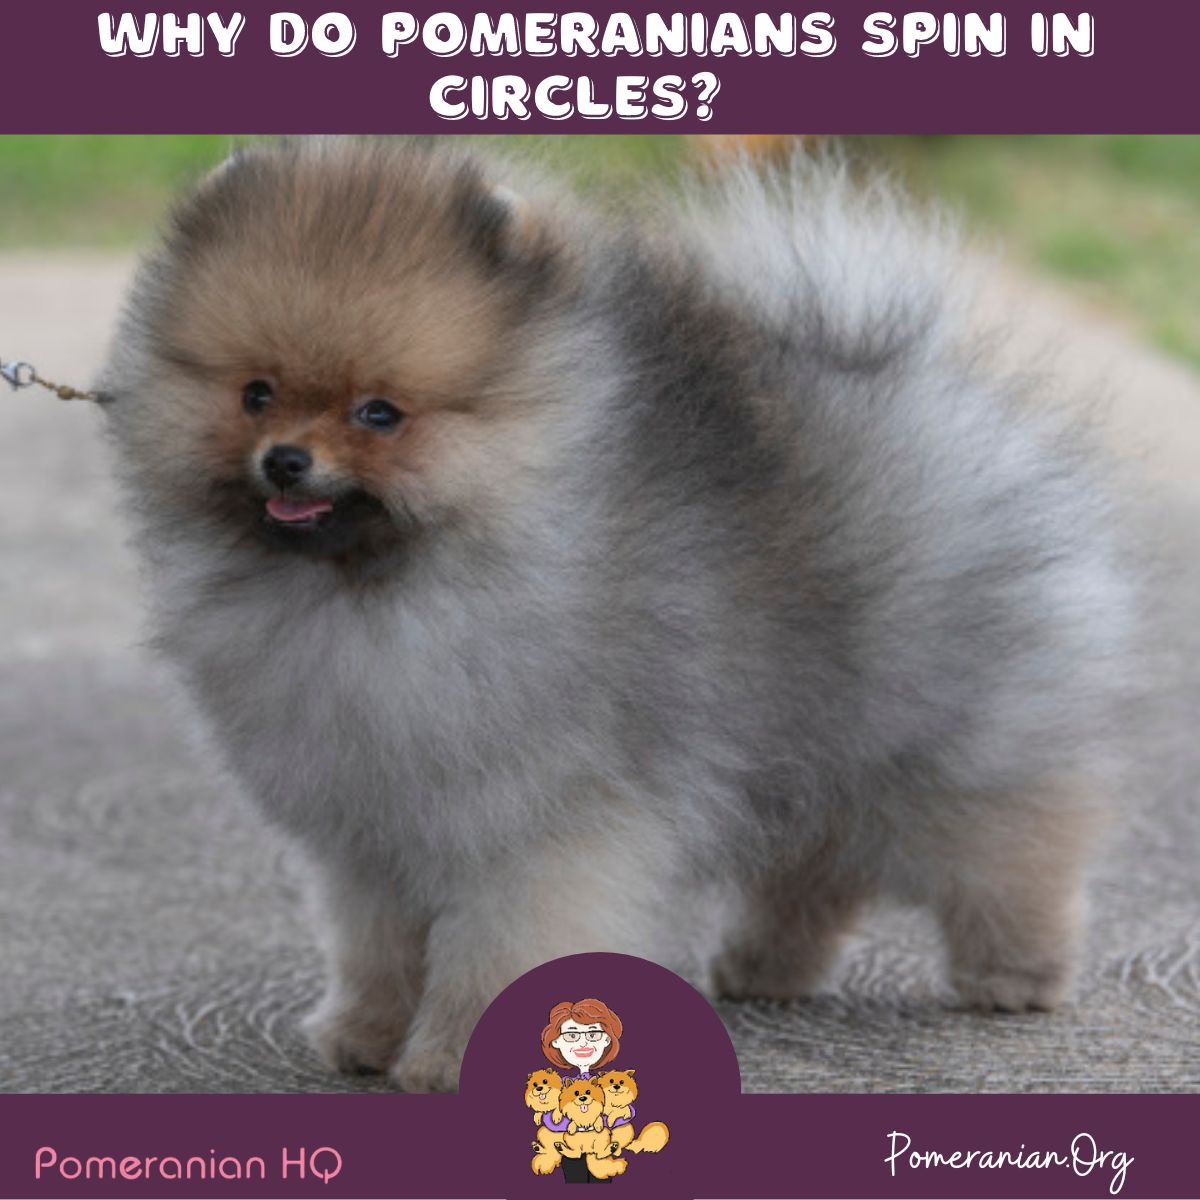 Why Do Pomeranians Spin In Circles?